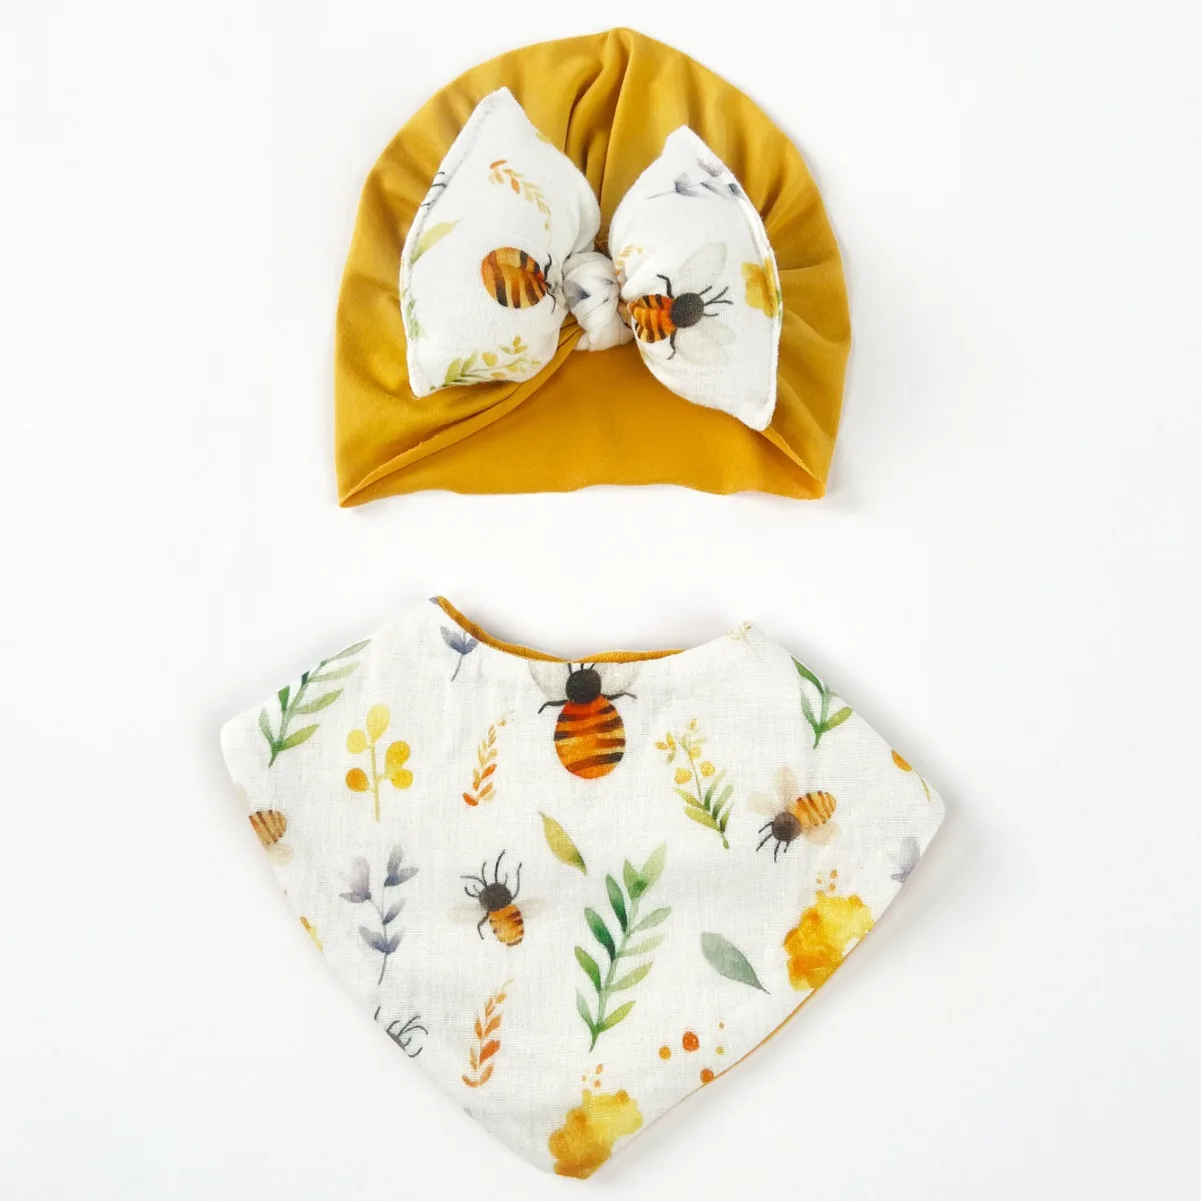 Soft Turban Hats with Bow Nursery Hospital Caps Beanies Bonnets for Baby Girls Newborns Infants Toddlers